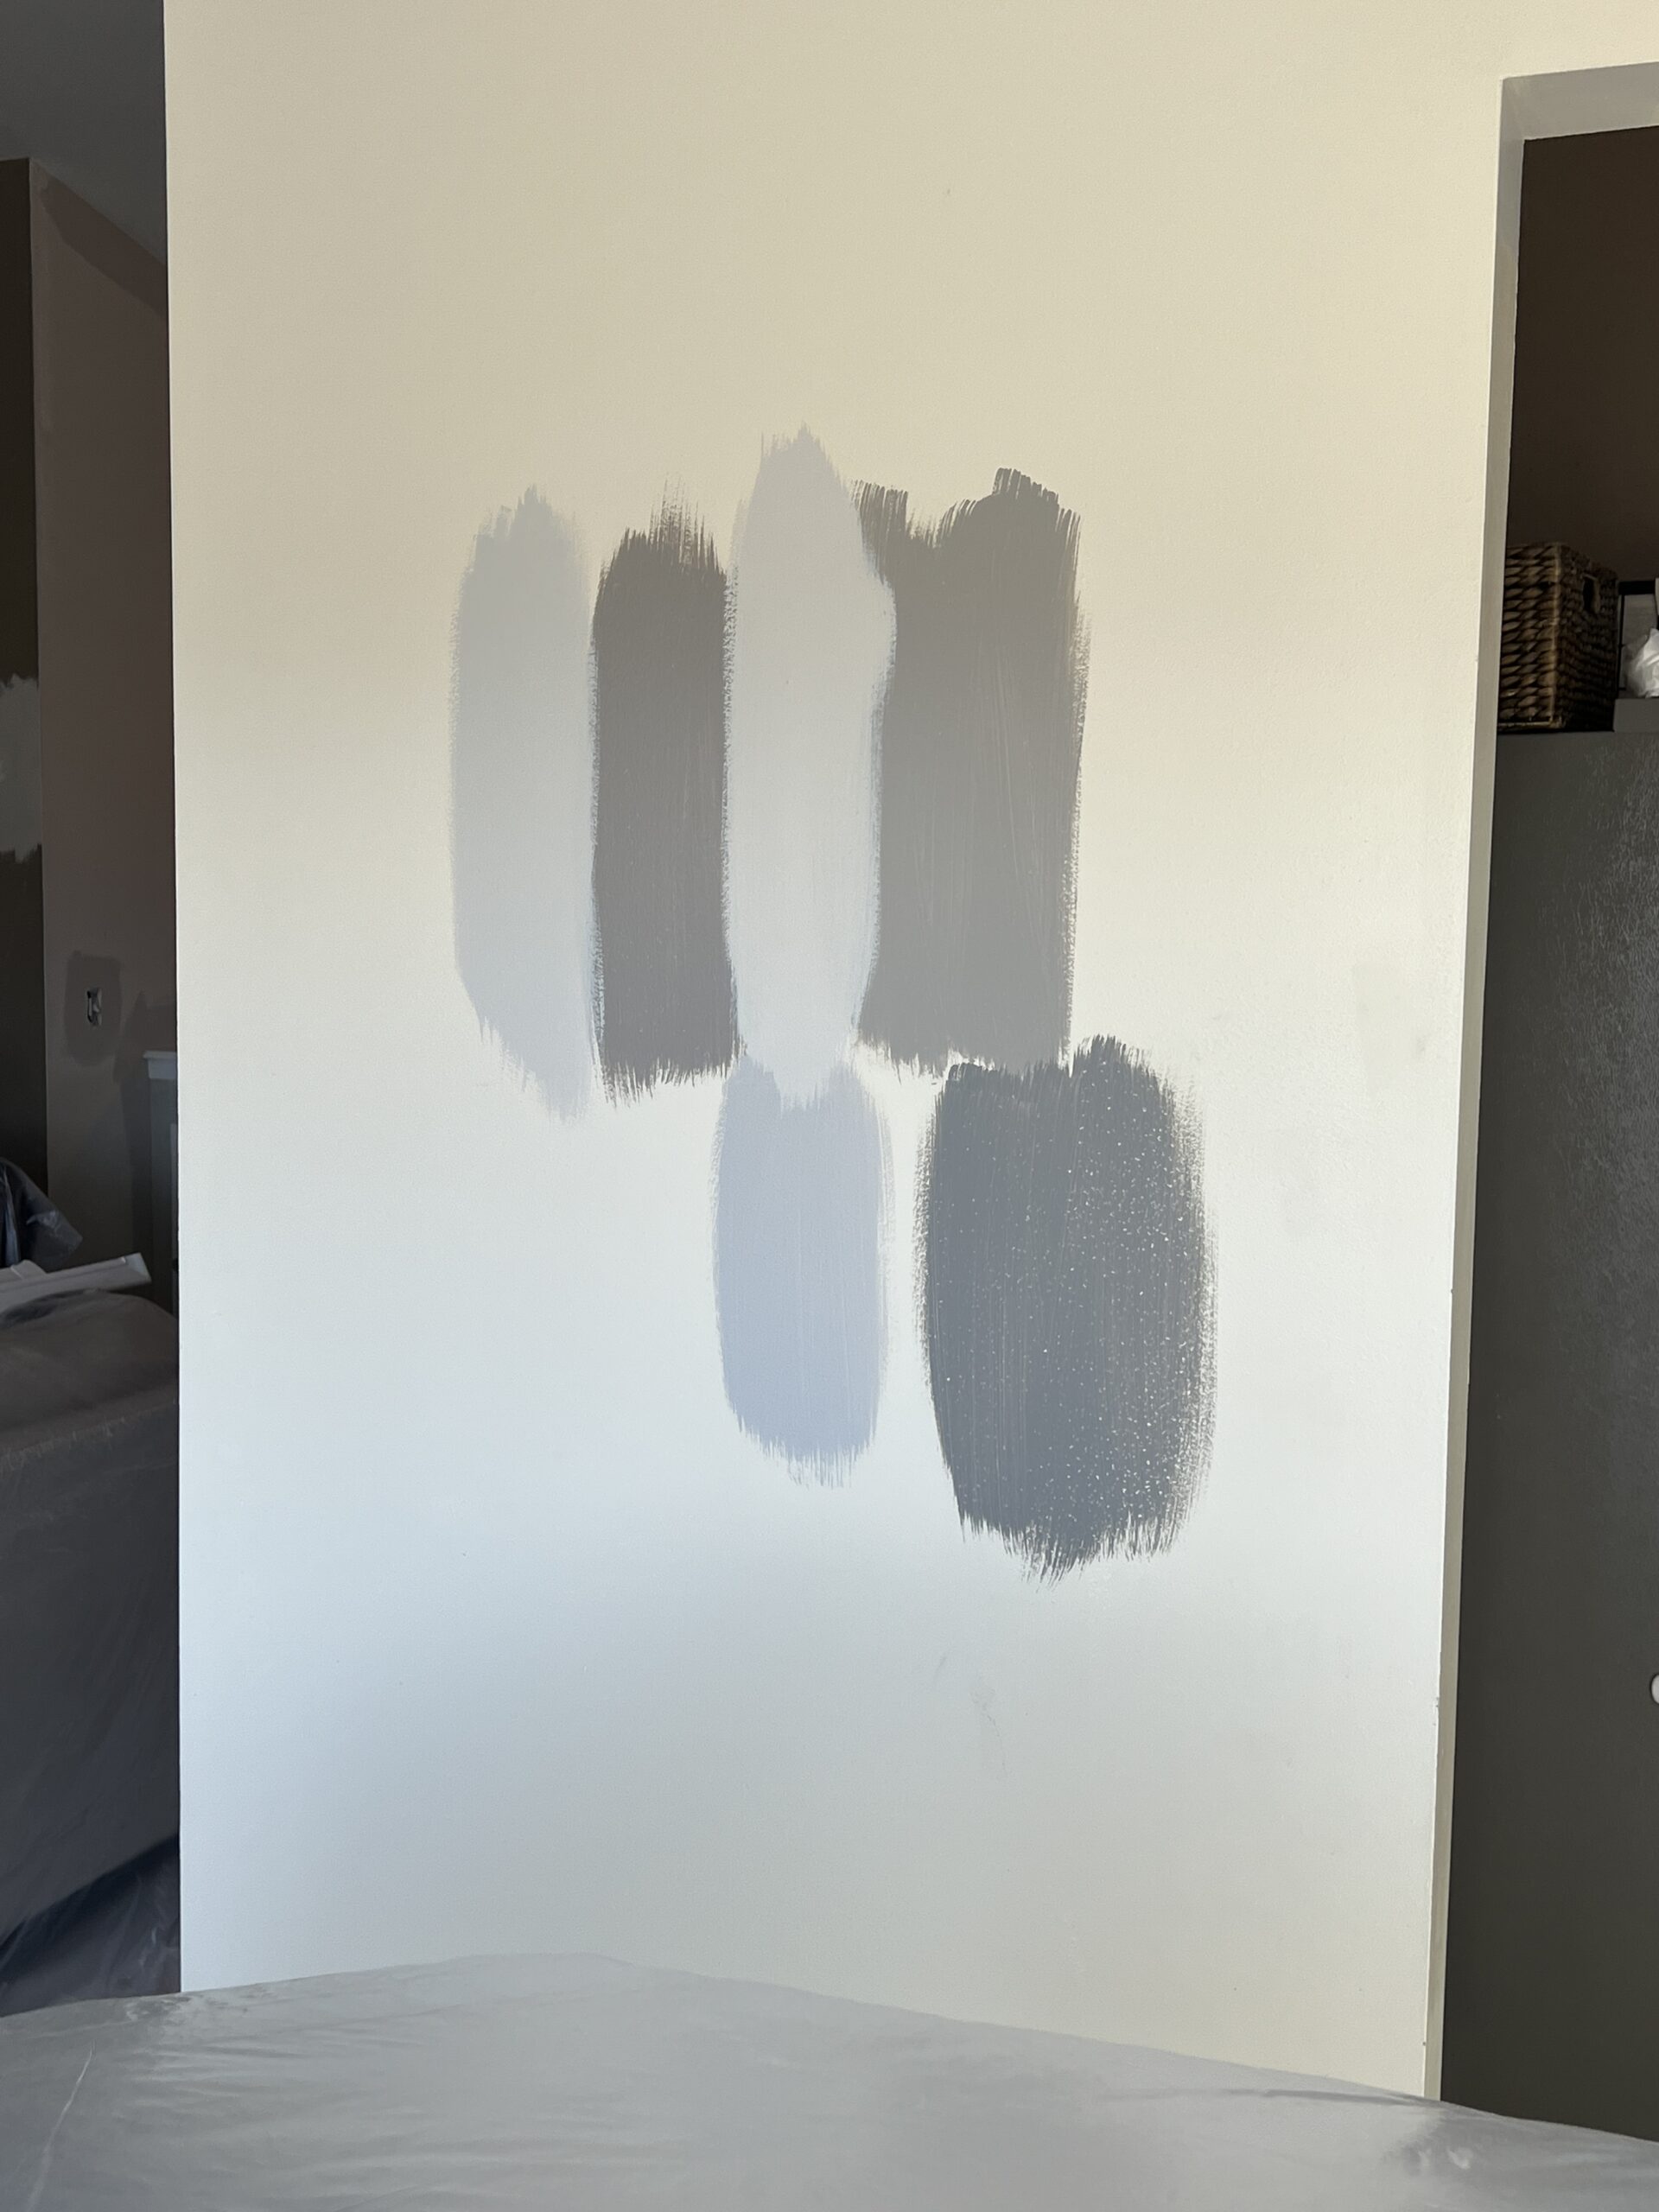 Testing out paint colors on their walls.